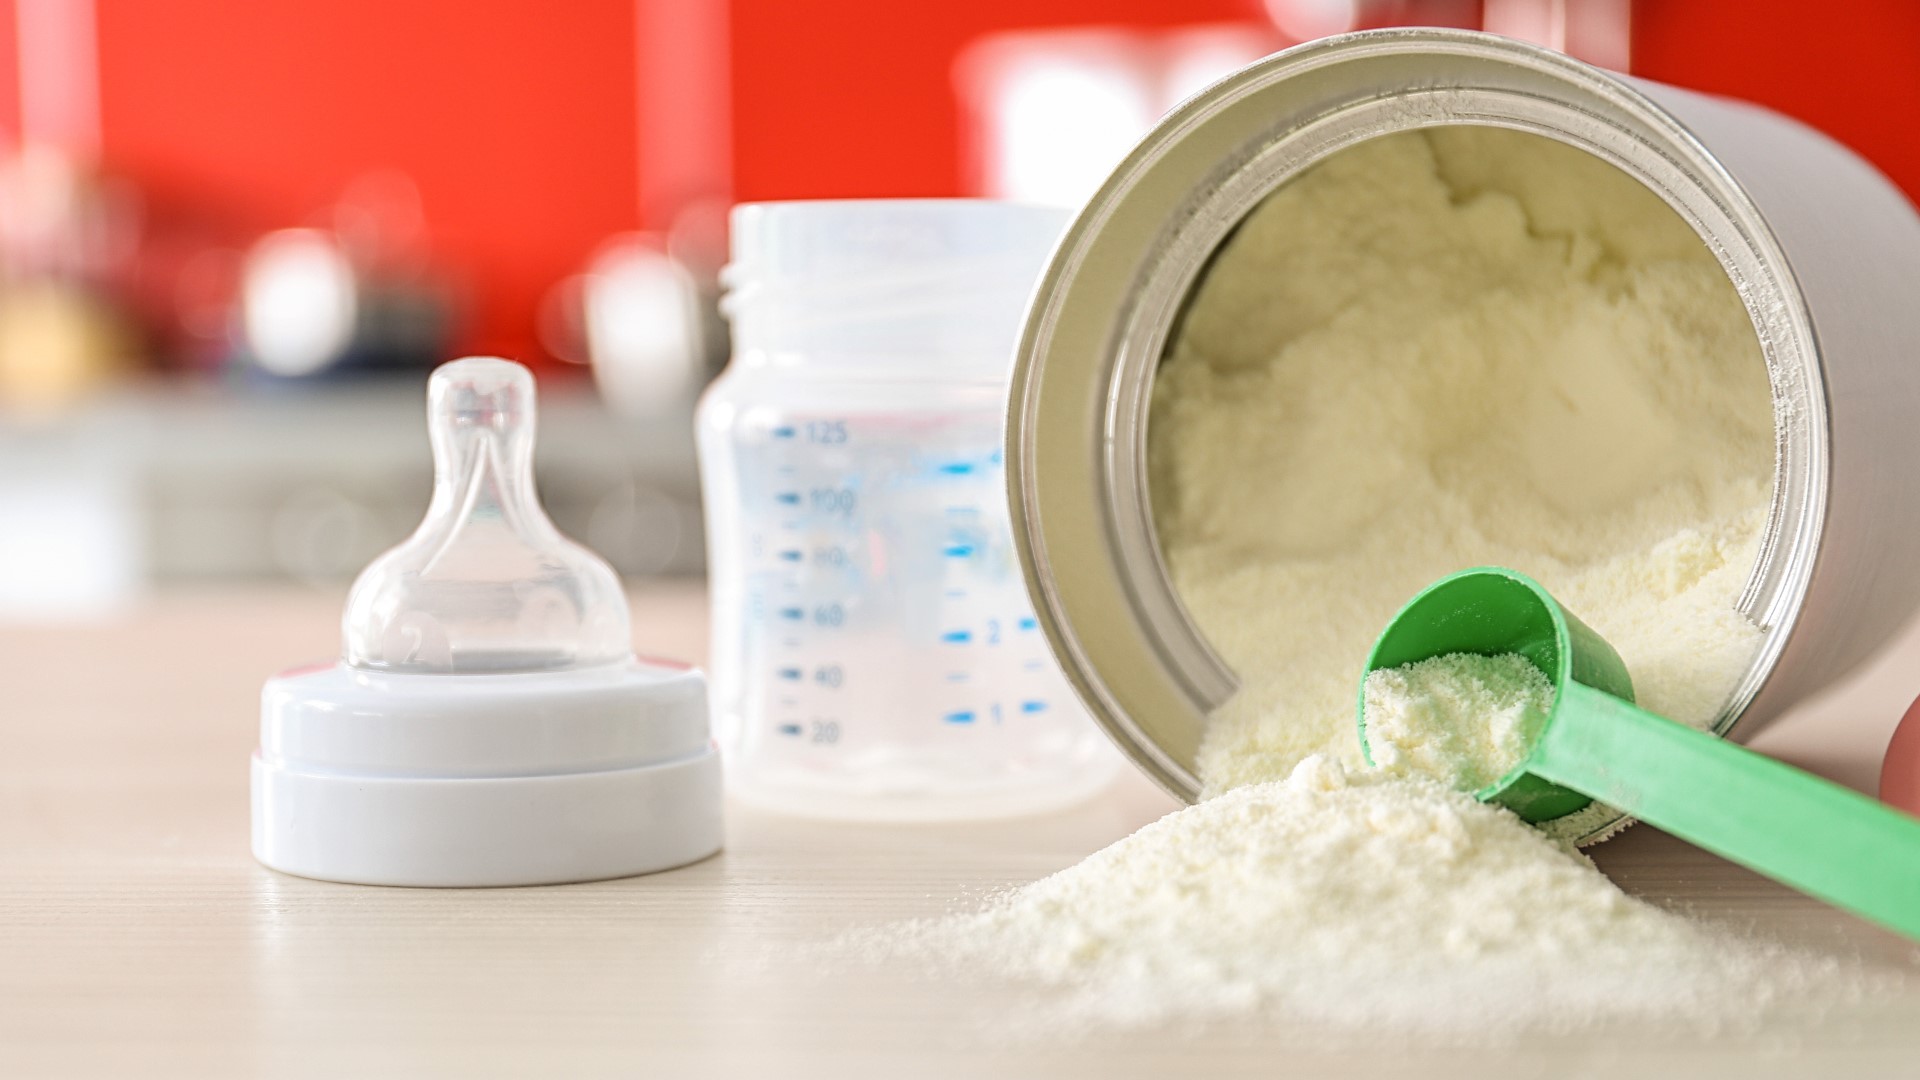 St Clair Co jury orders baby formula manufacturer to pay $60M khou com